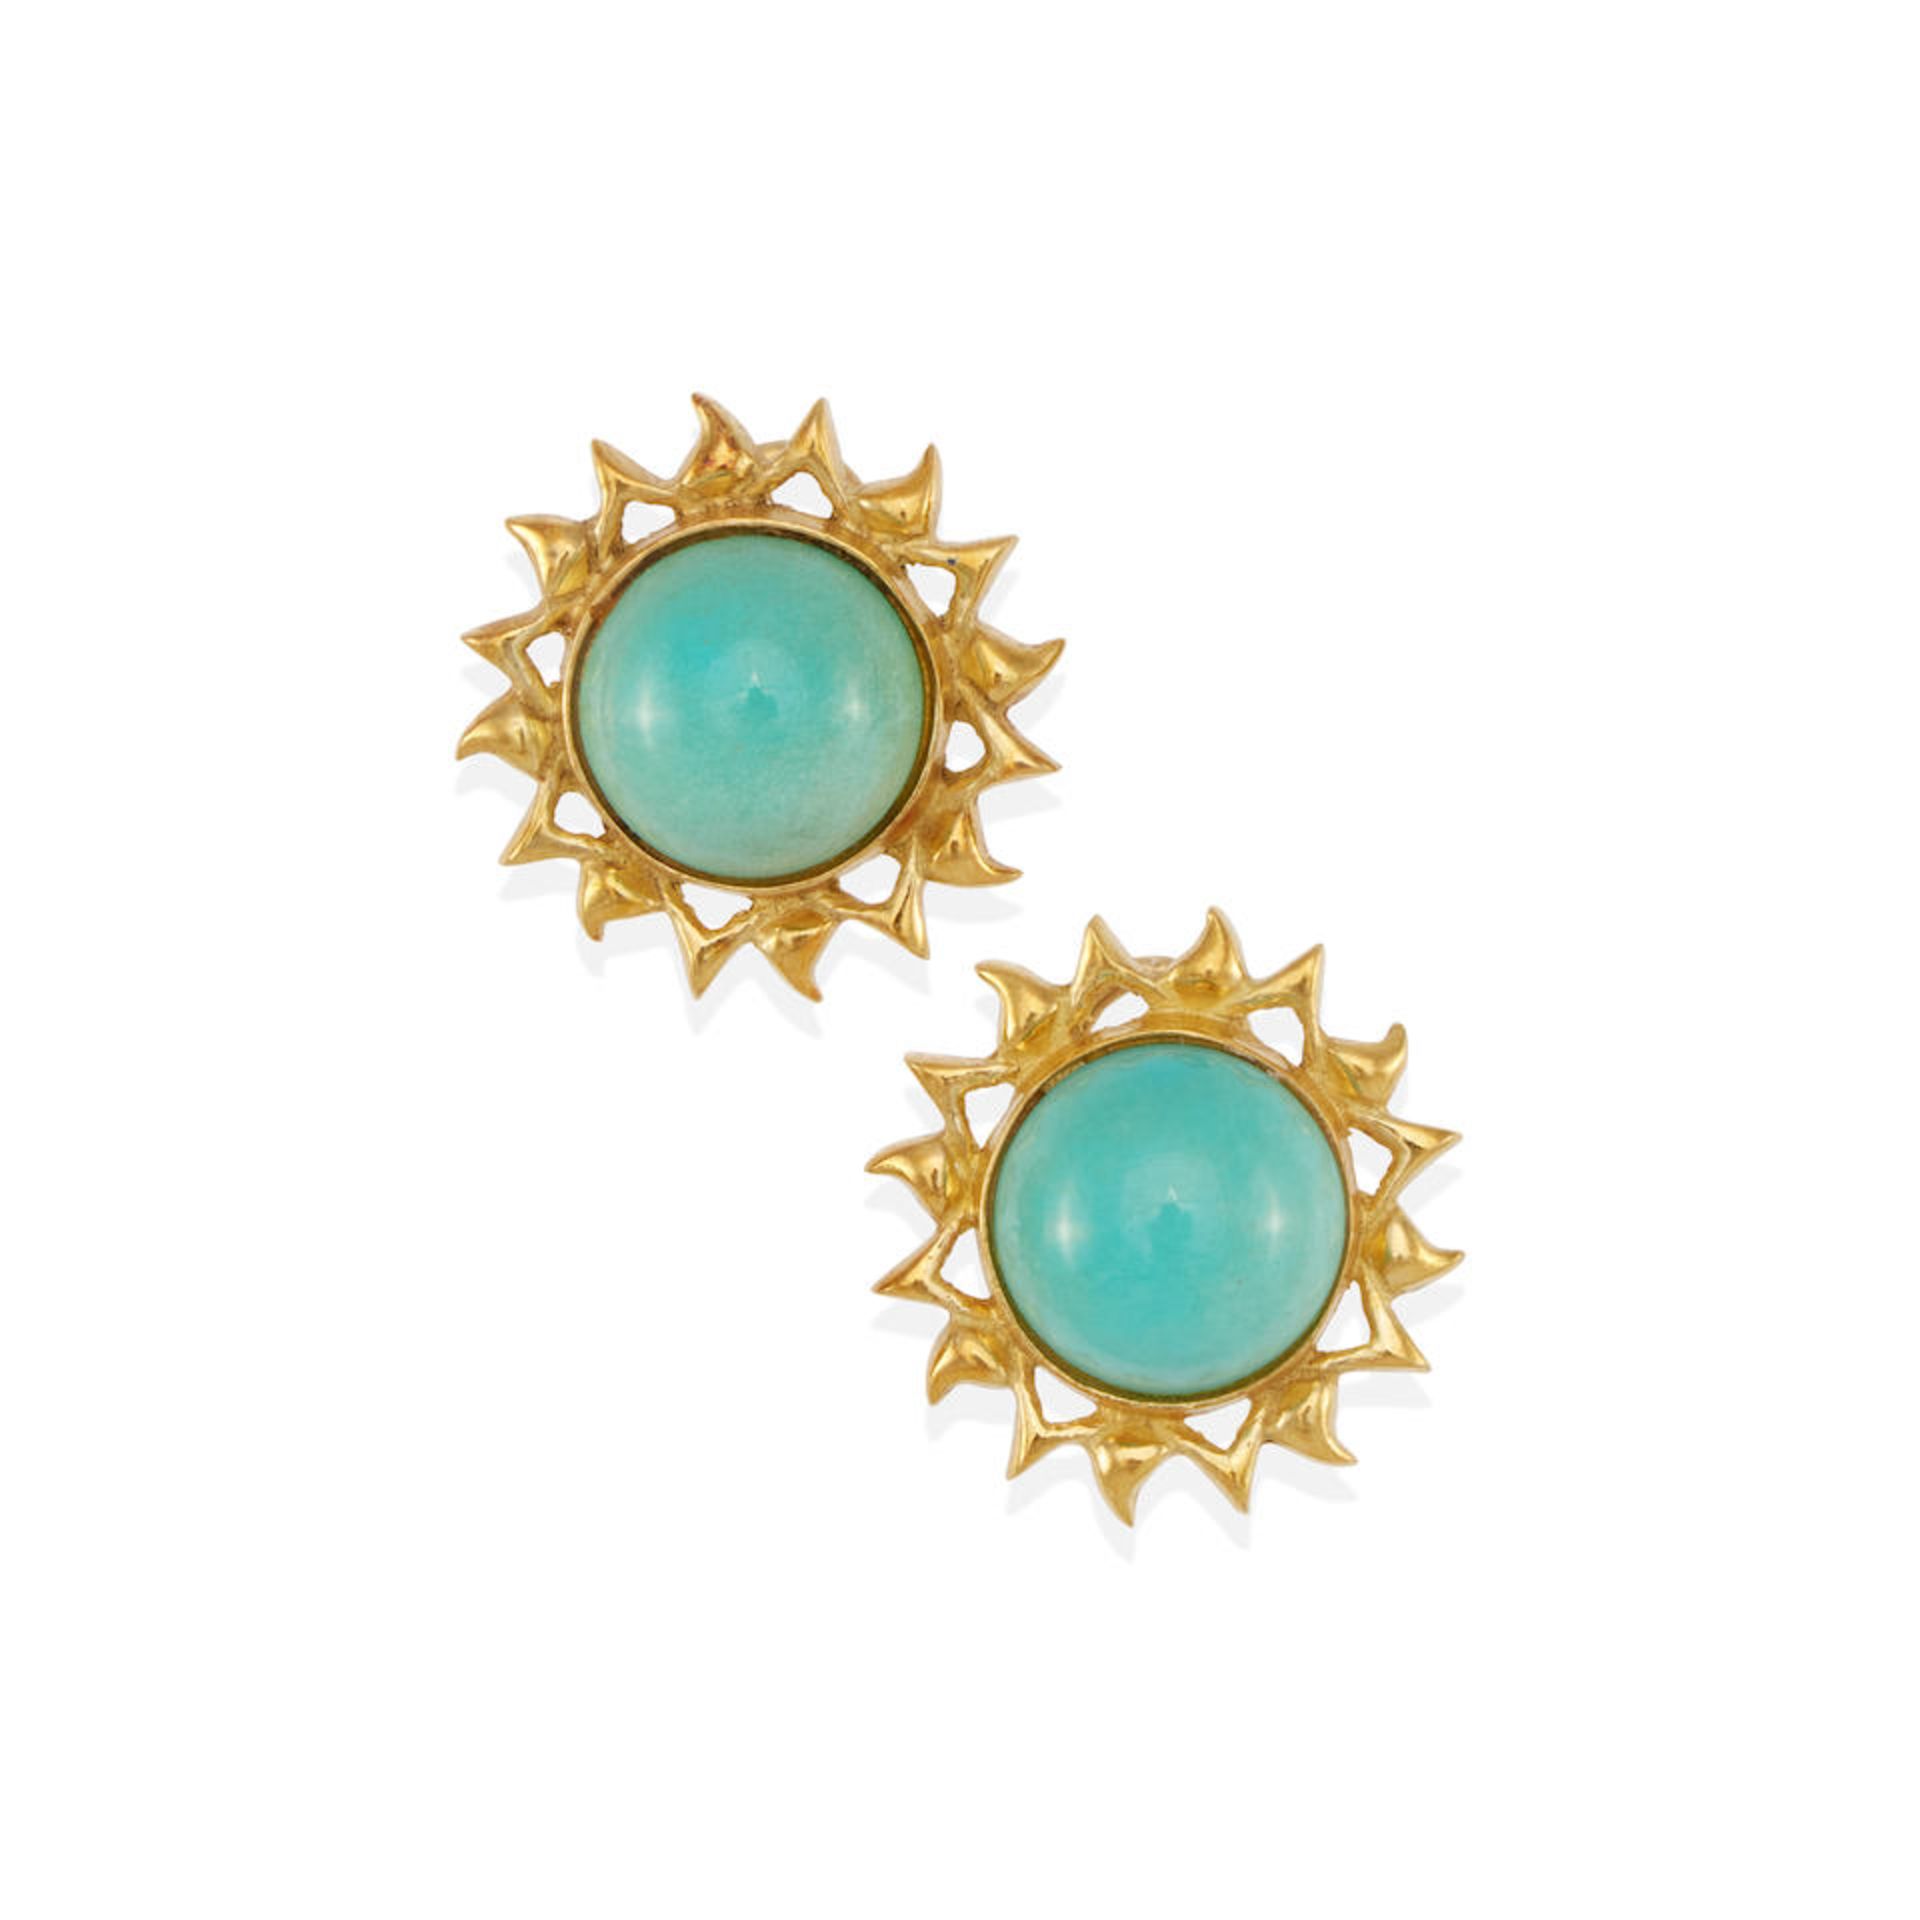 A PAIR OF 18K GOLD AND TURQUOISE EARRINGS